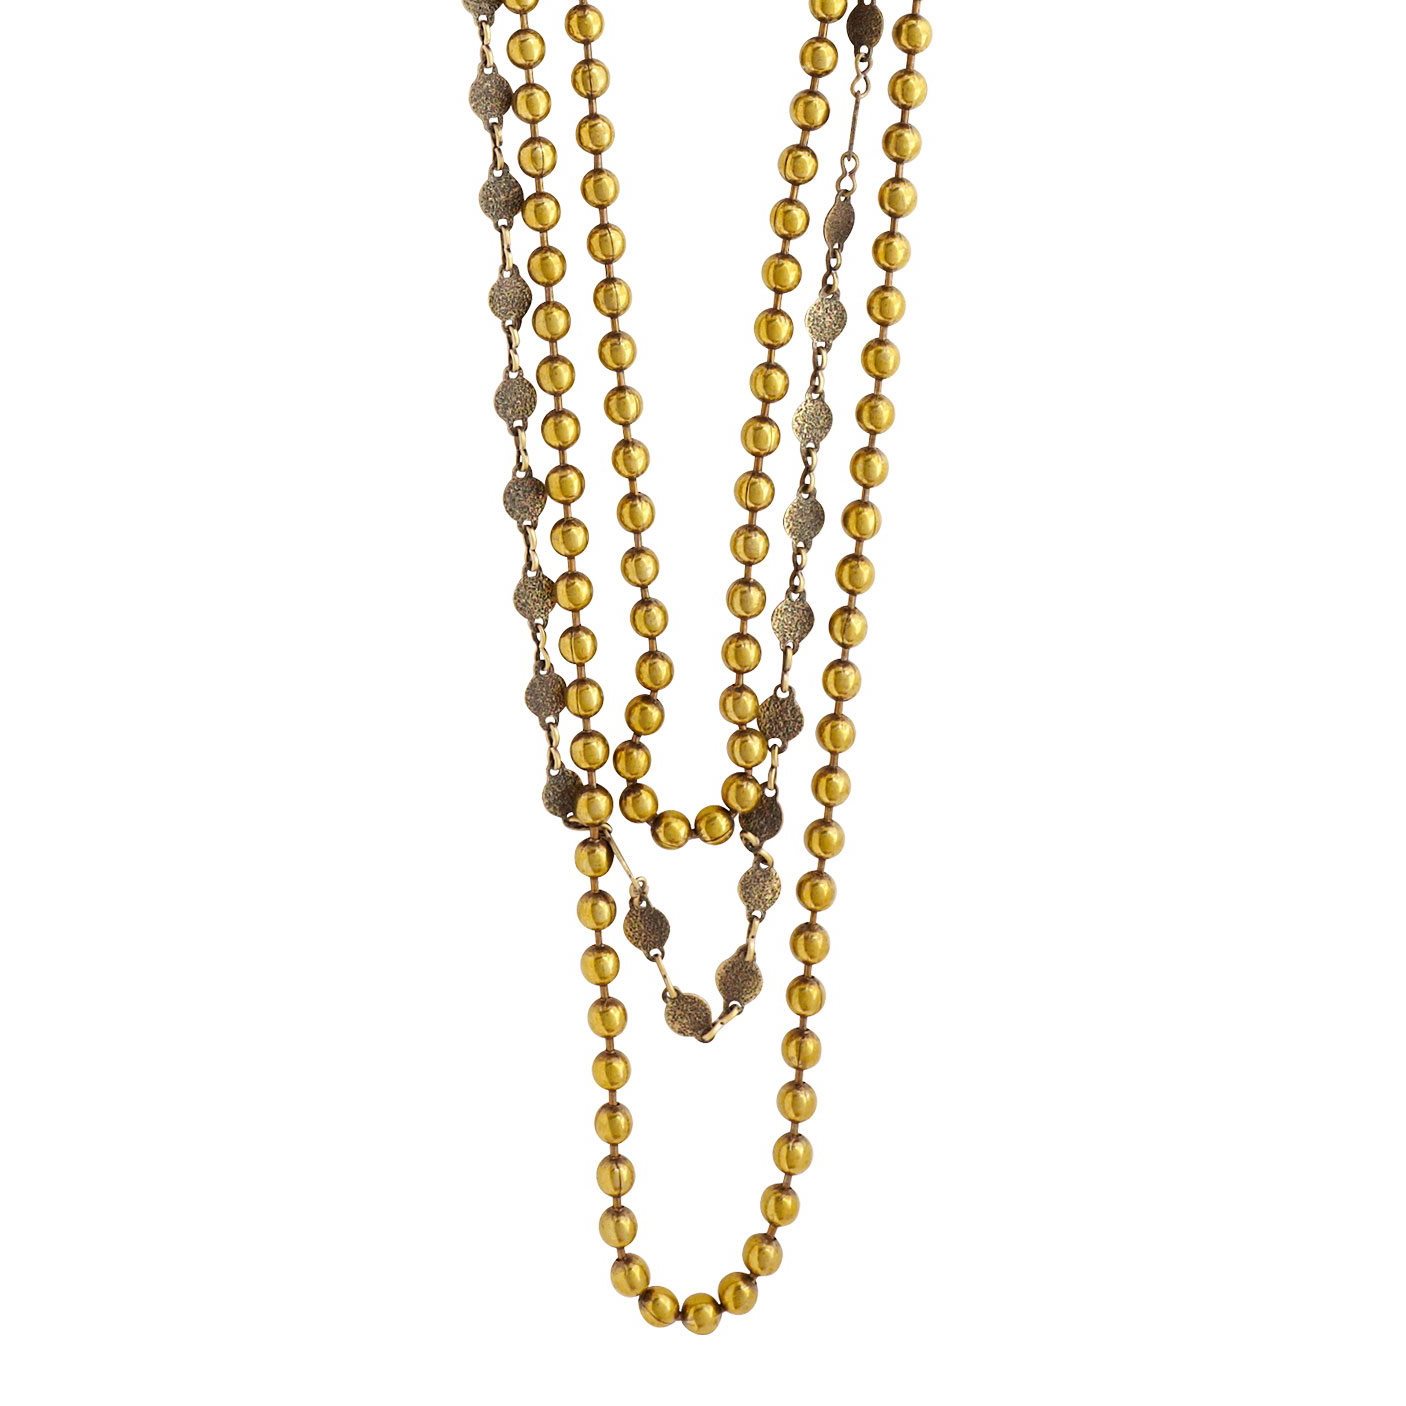 Antique Brass Mixed Chain Necklace